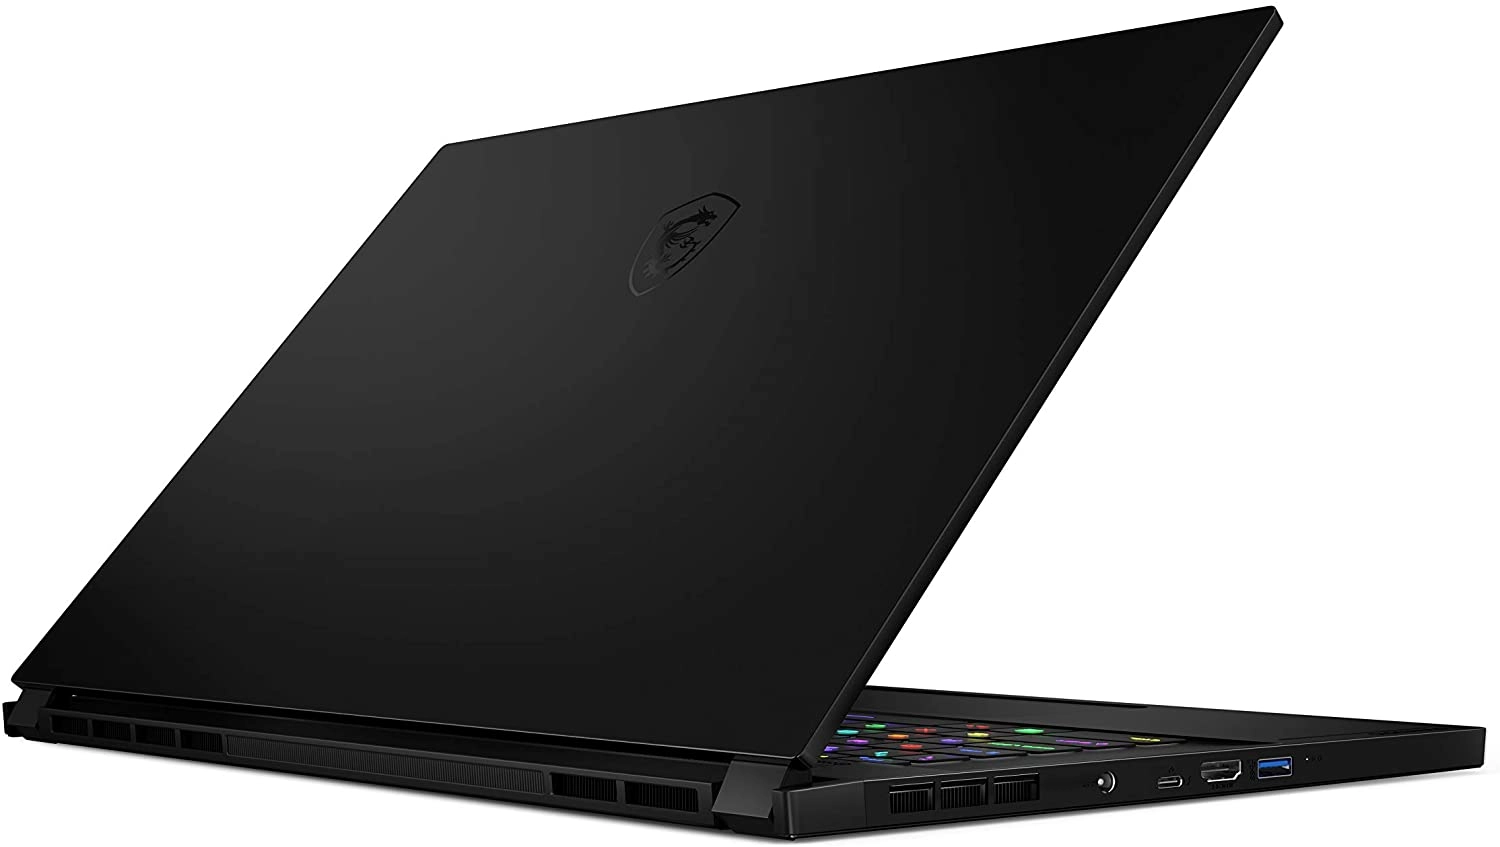 MSI GS66 Stealth 10SGS-441 laptop image